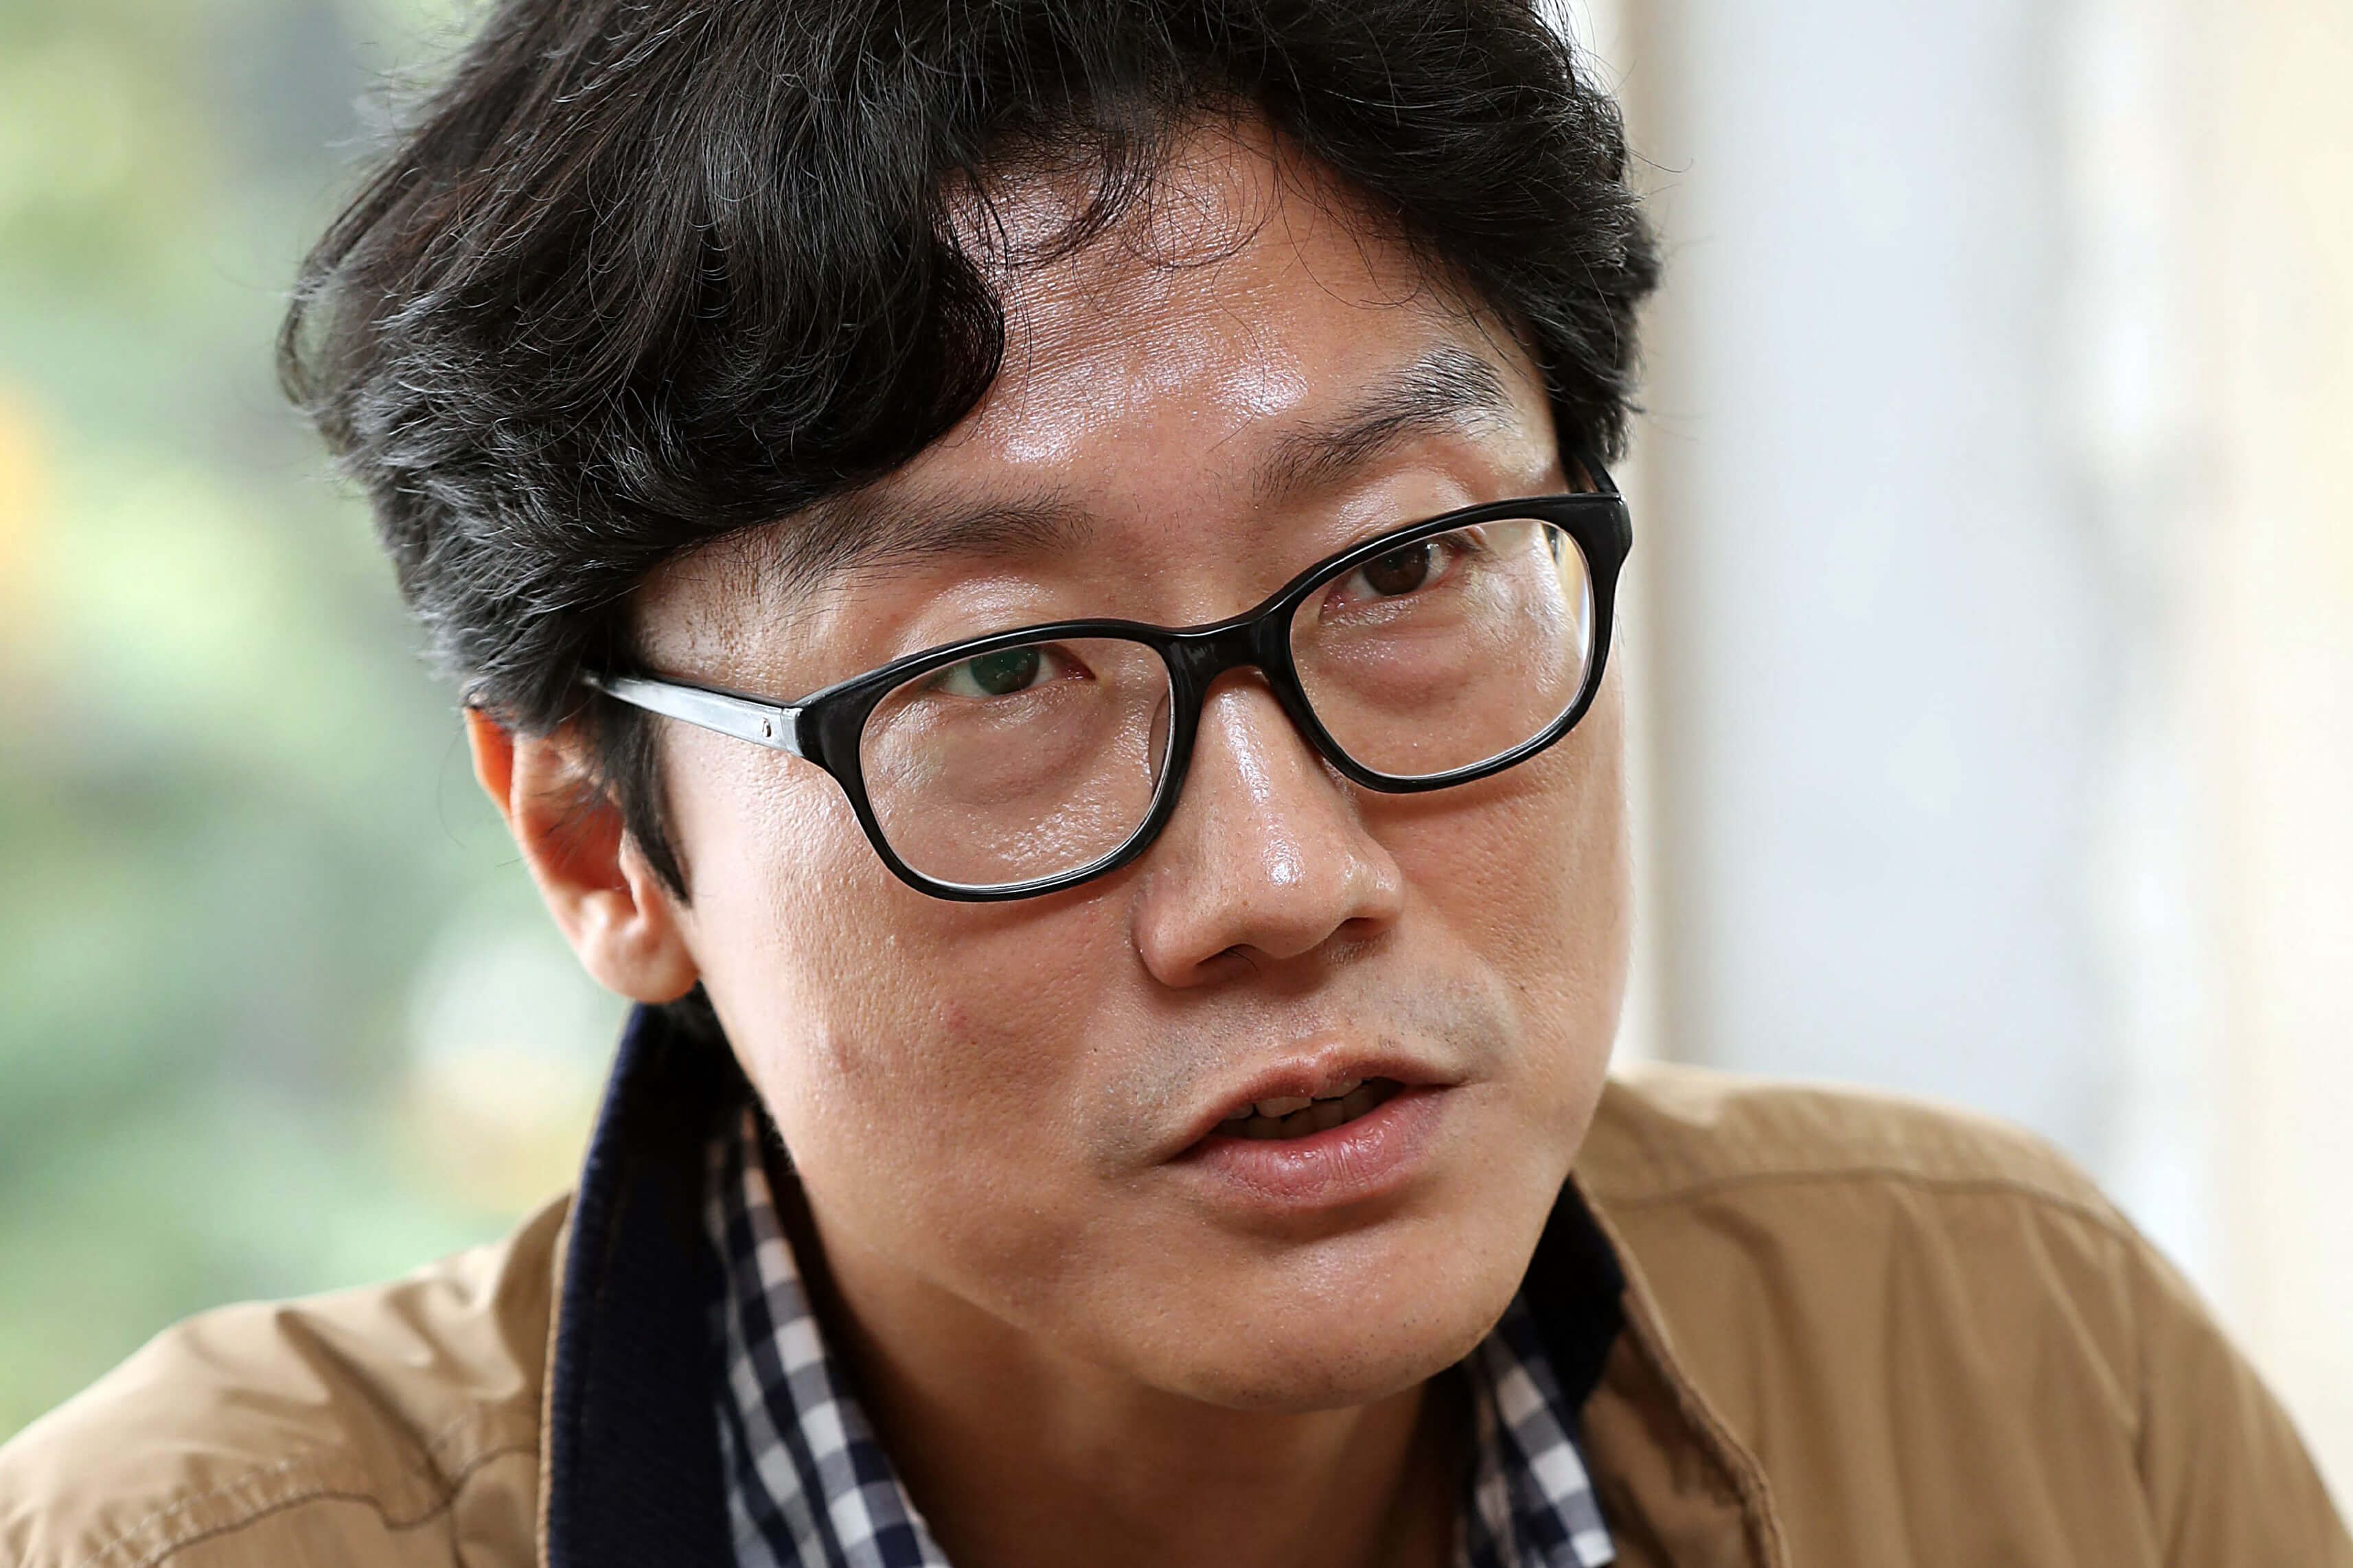 Squid Game director 'survived' Korea's hyper-competitive society because he joined 'a good university'